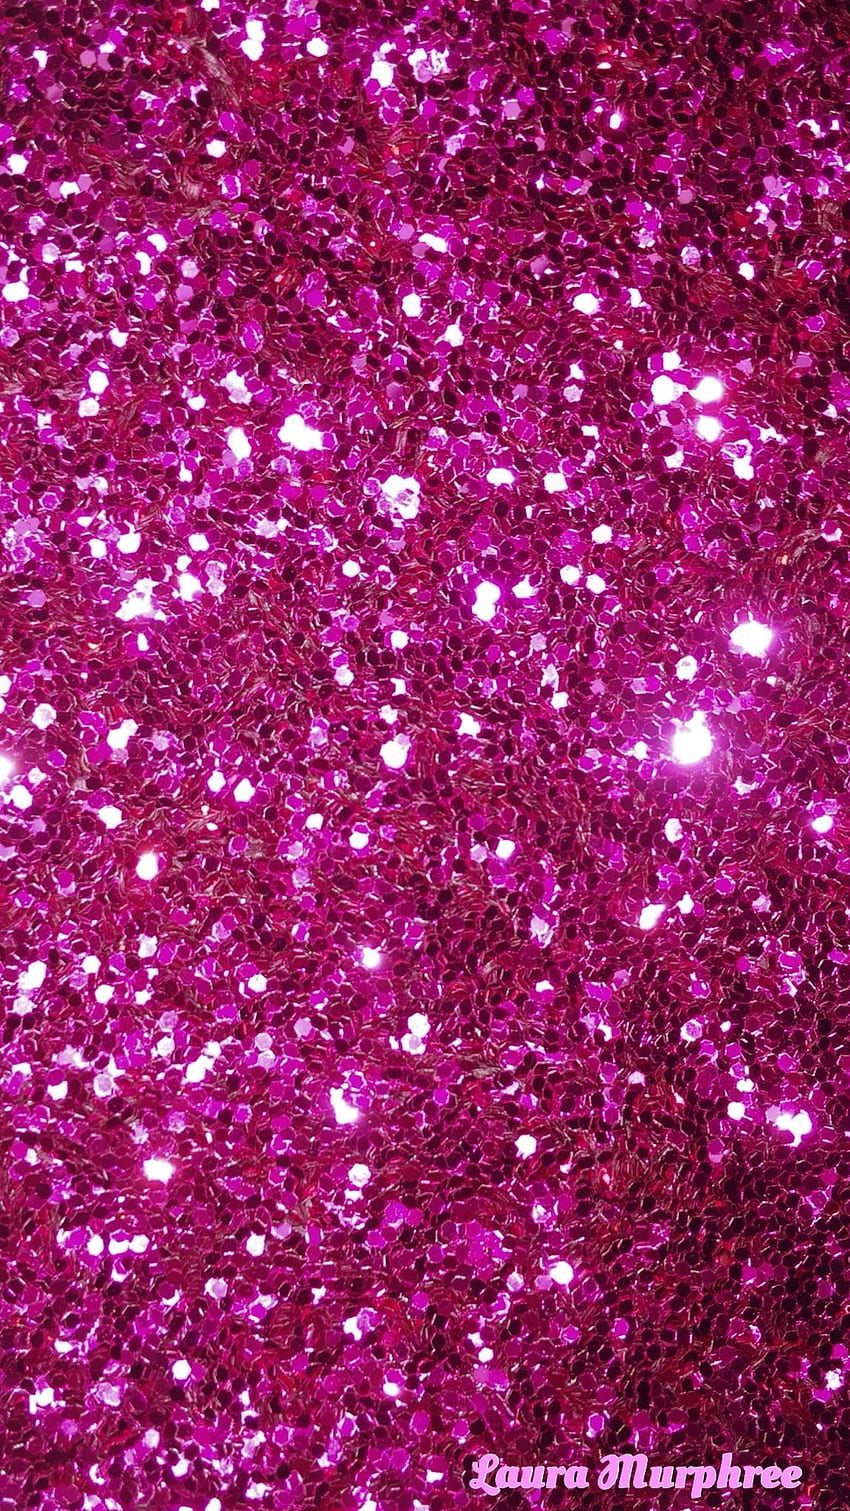 Pink Glitter iPhone Wallpapers  Top Free Pink Glitter iPhone Backgrounds   WallpaperAccess